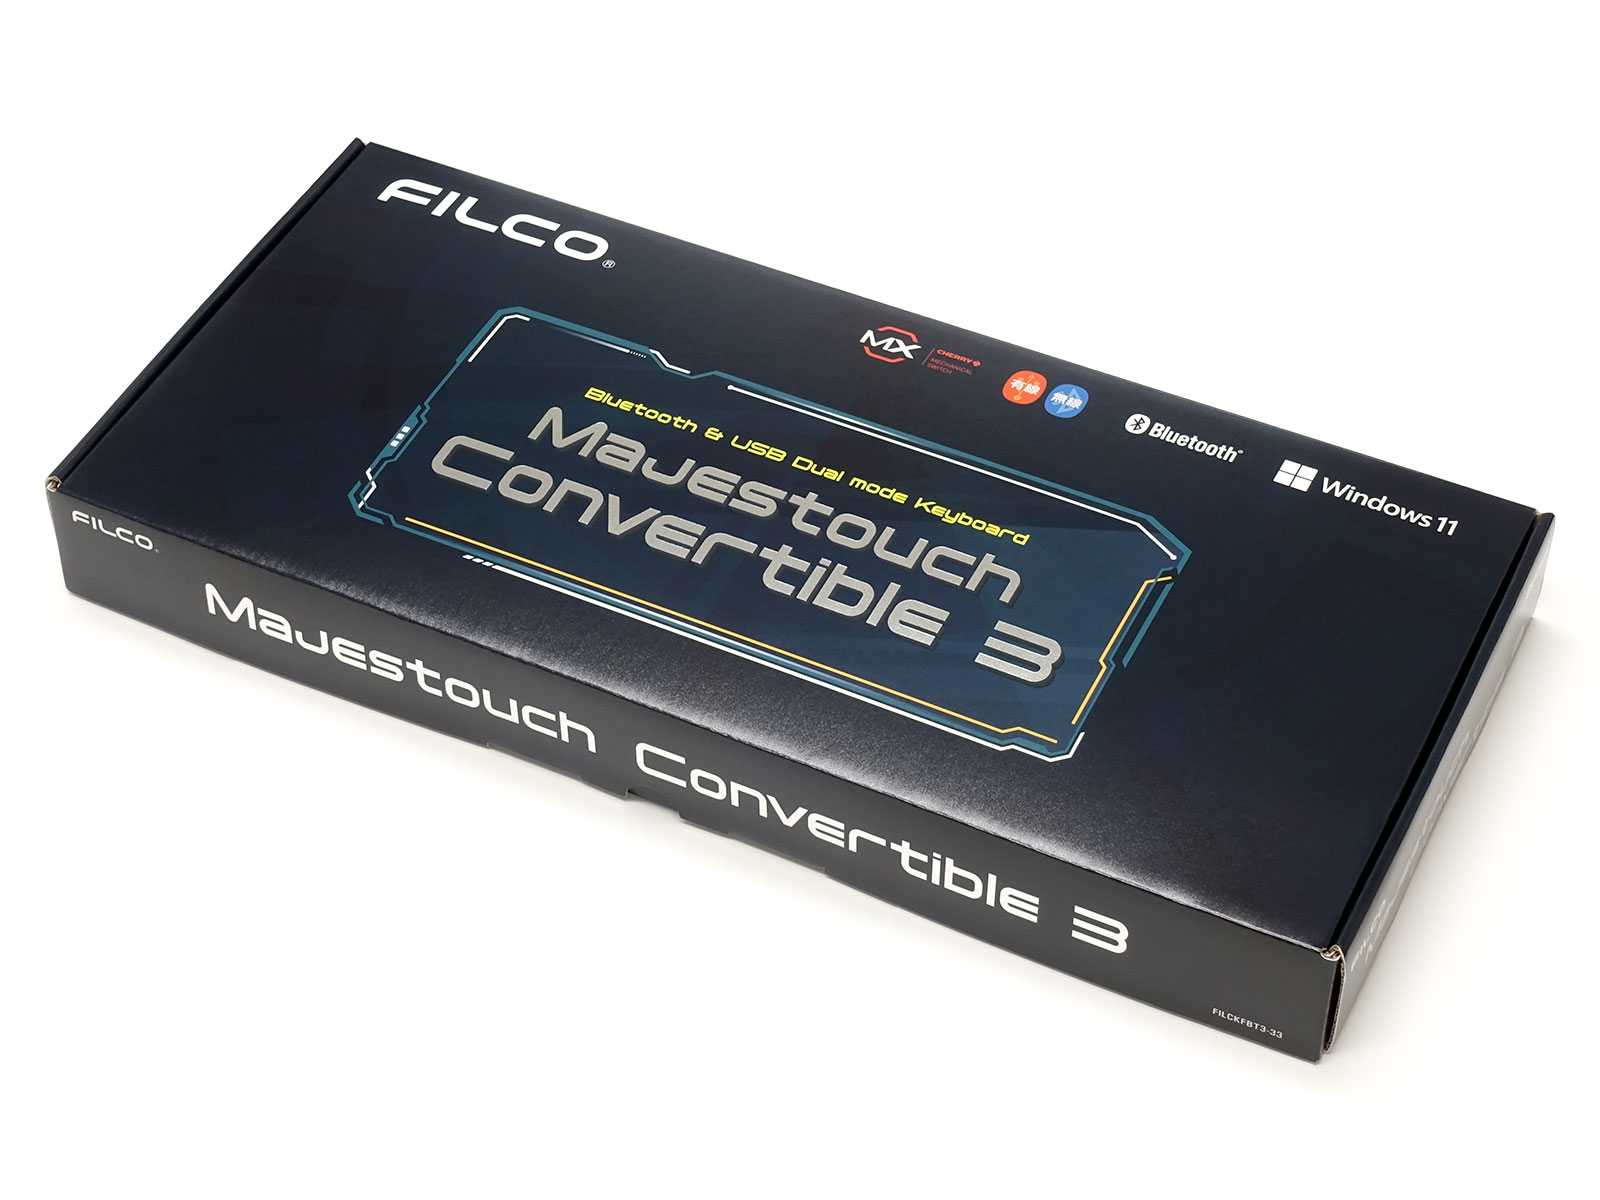 Majestouch Convertible 3 color box for full size keyboard